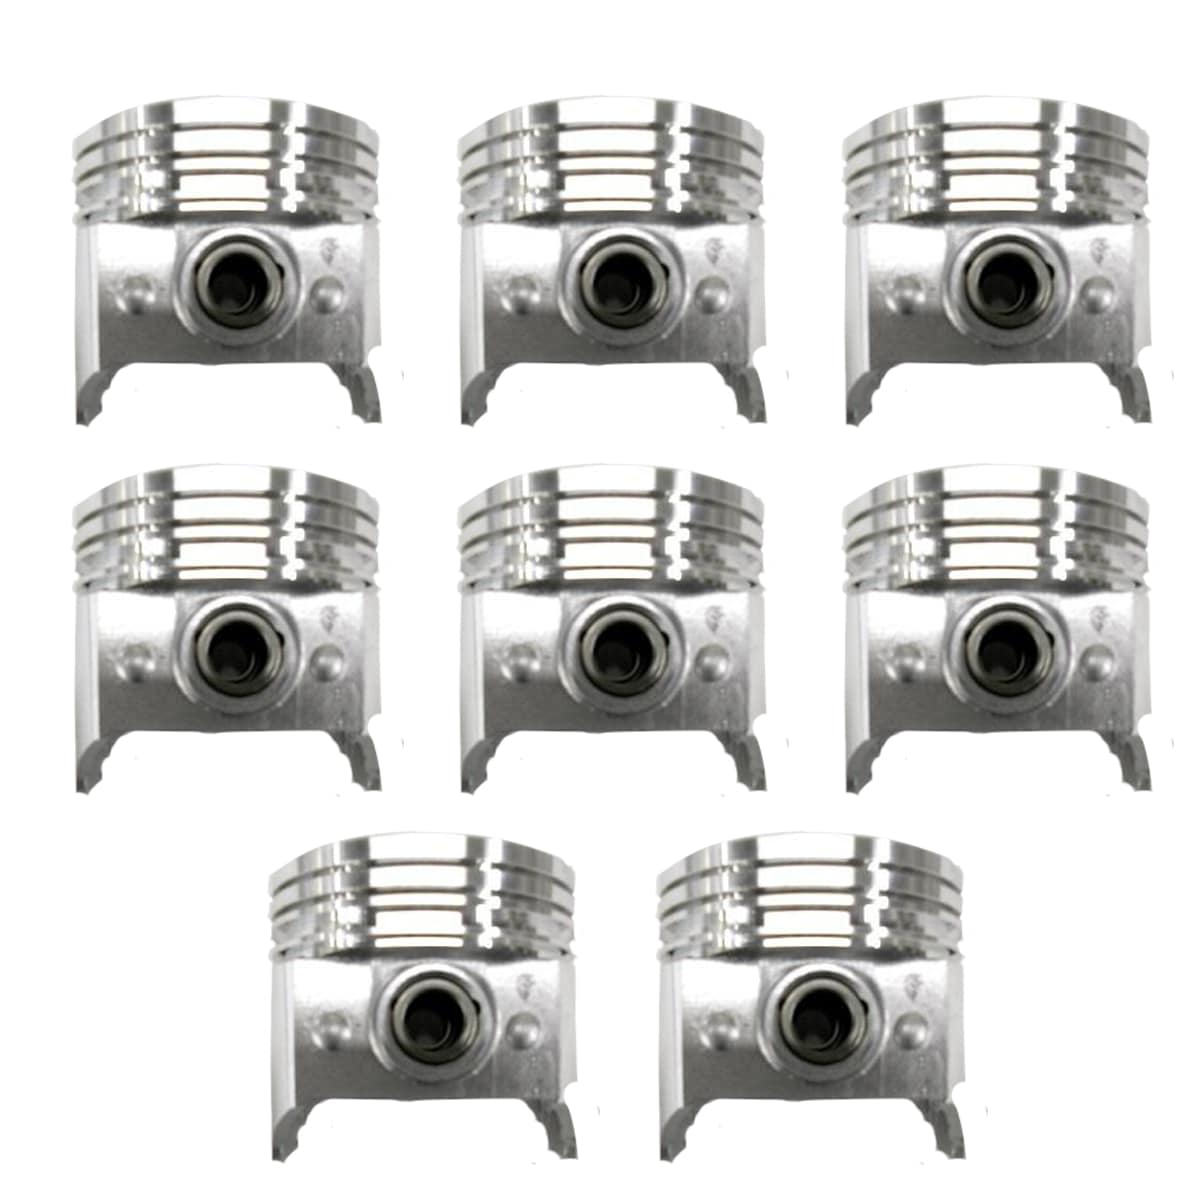 1958-1967 PISTONS 283 STANDARD CHEVY SET OF 8 SPECIAL ORDER Chevrolet and GMC Pickup Truck